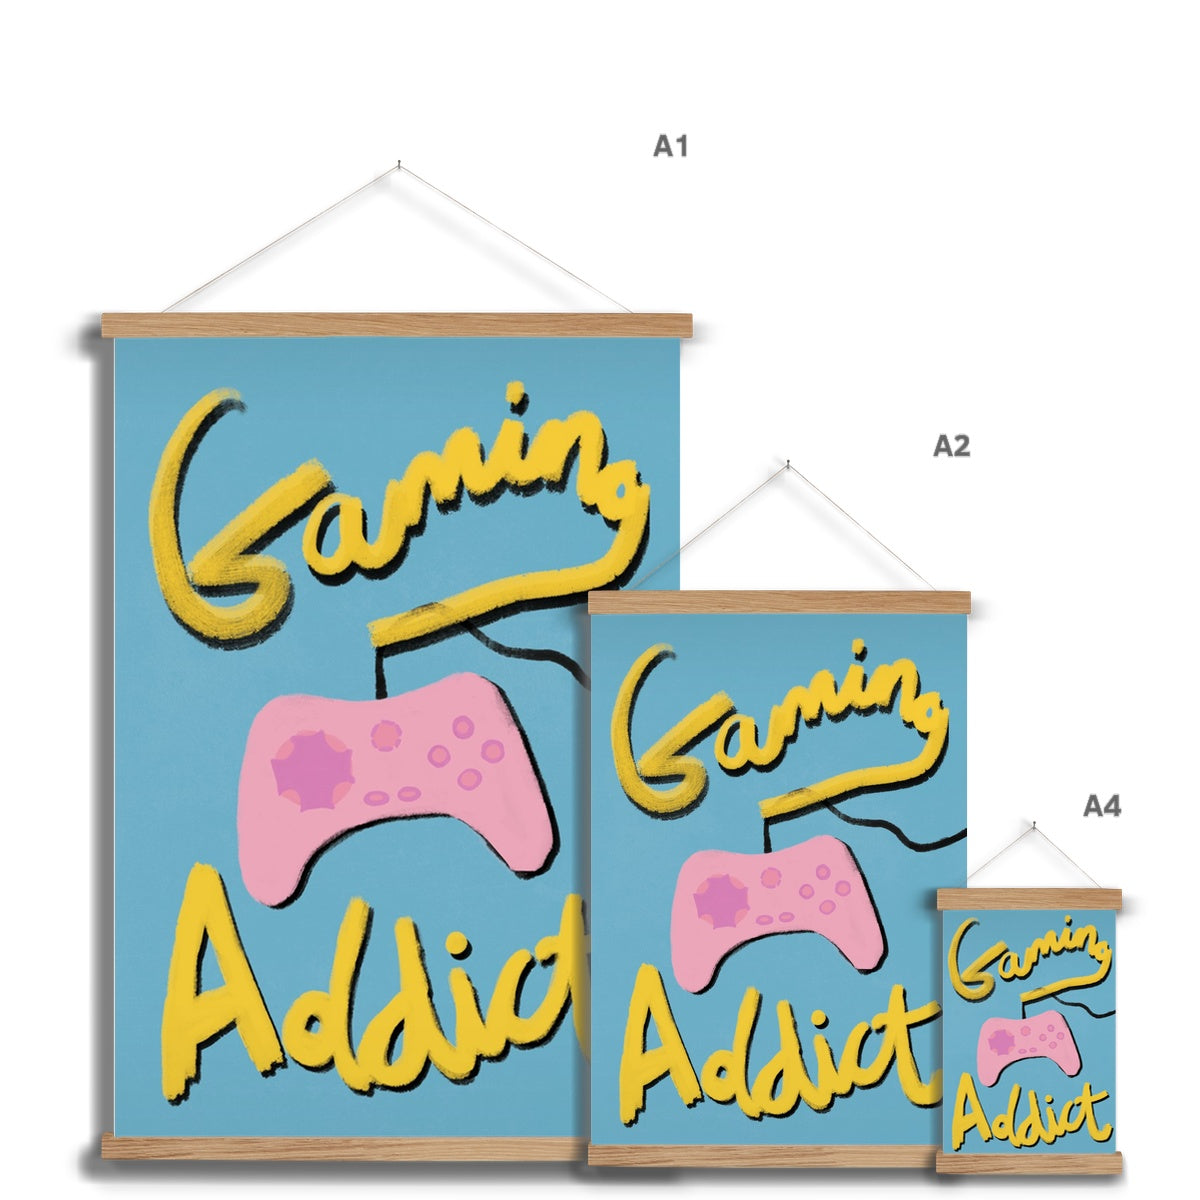 Gaming Addict Print - Blue, Yellow, Pink Fine Art Print with Hanger